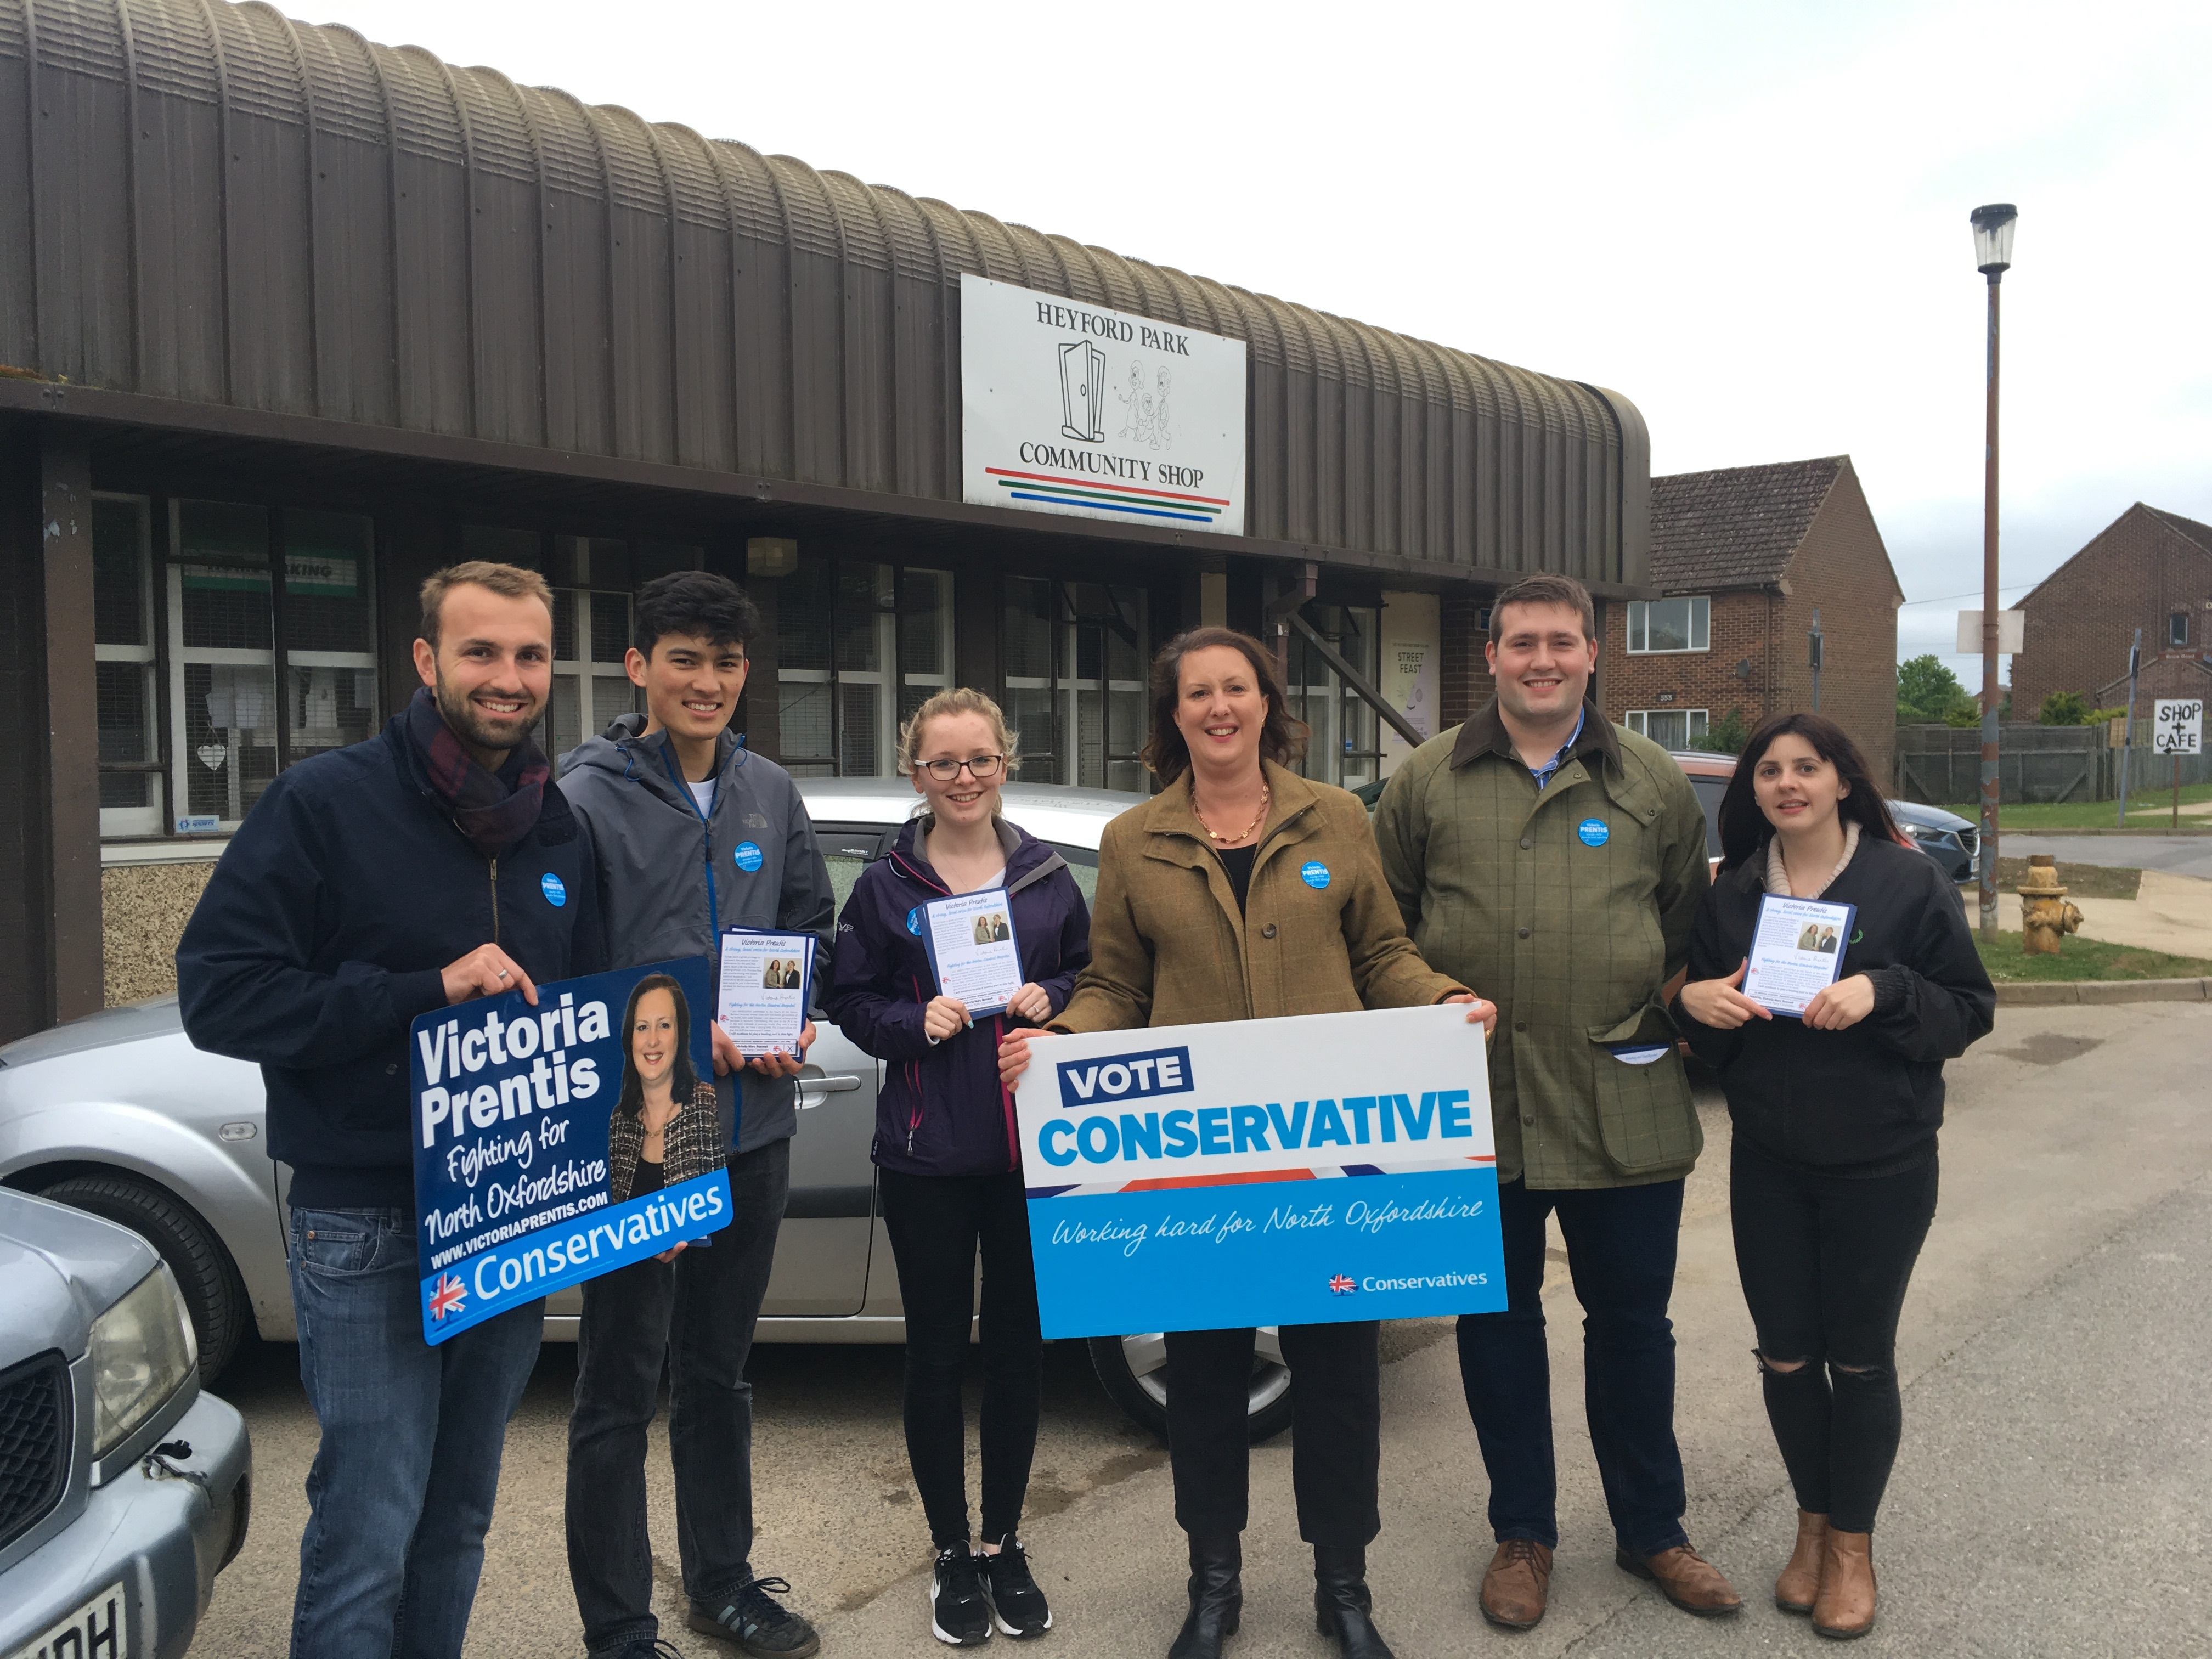 Baldry Club members canvassing with Victoria Prentis on Heyford Park